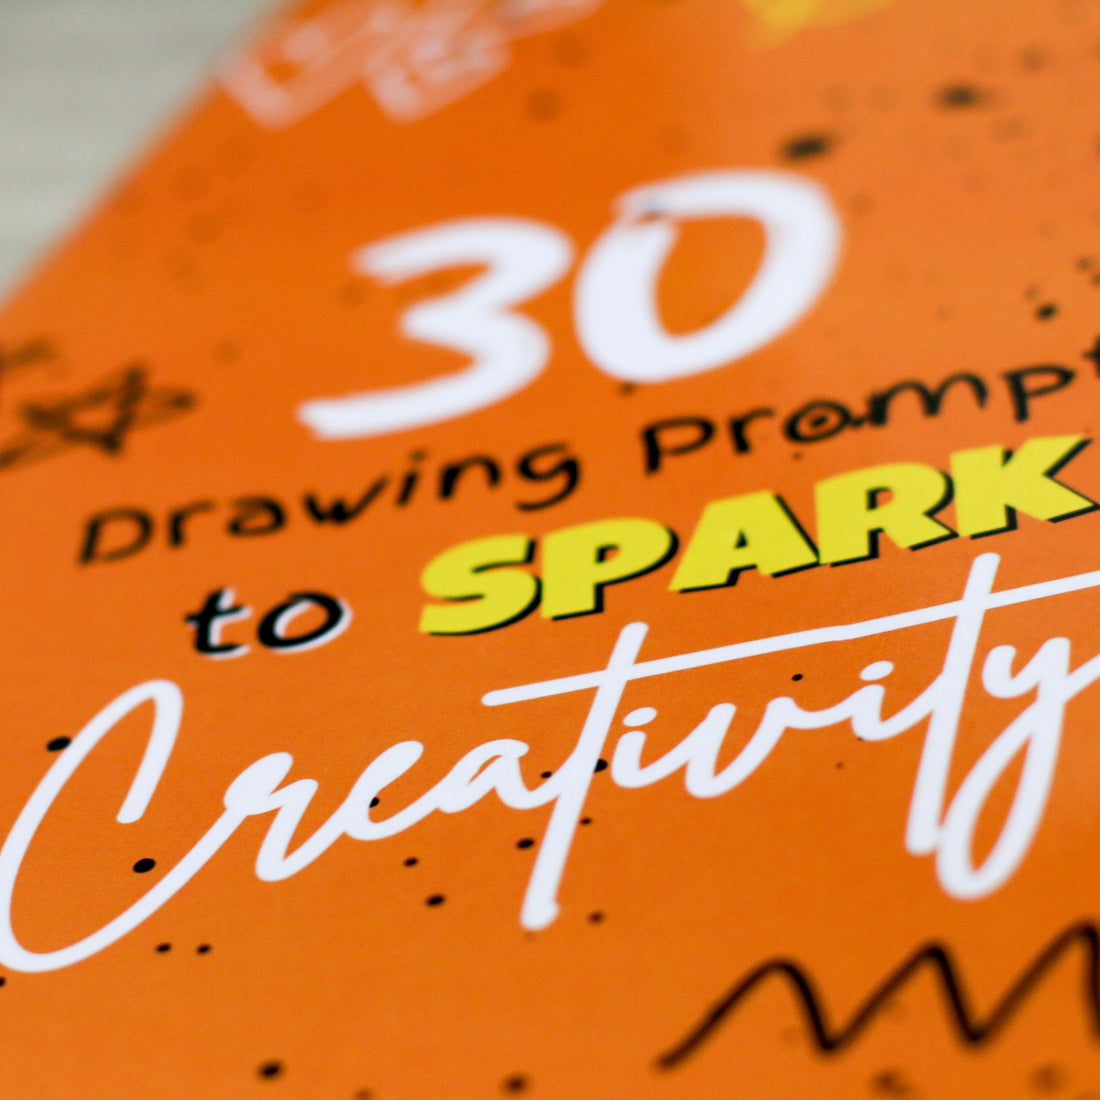 Have you lost your creative SPARK?